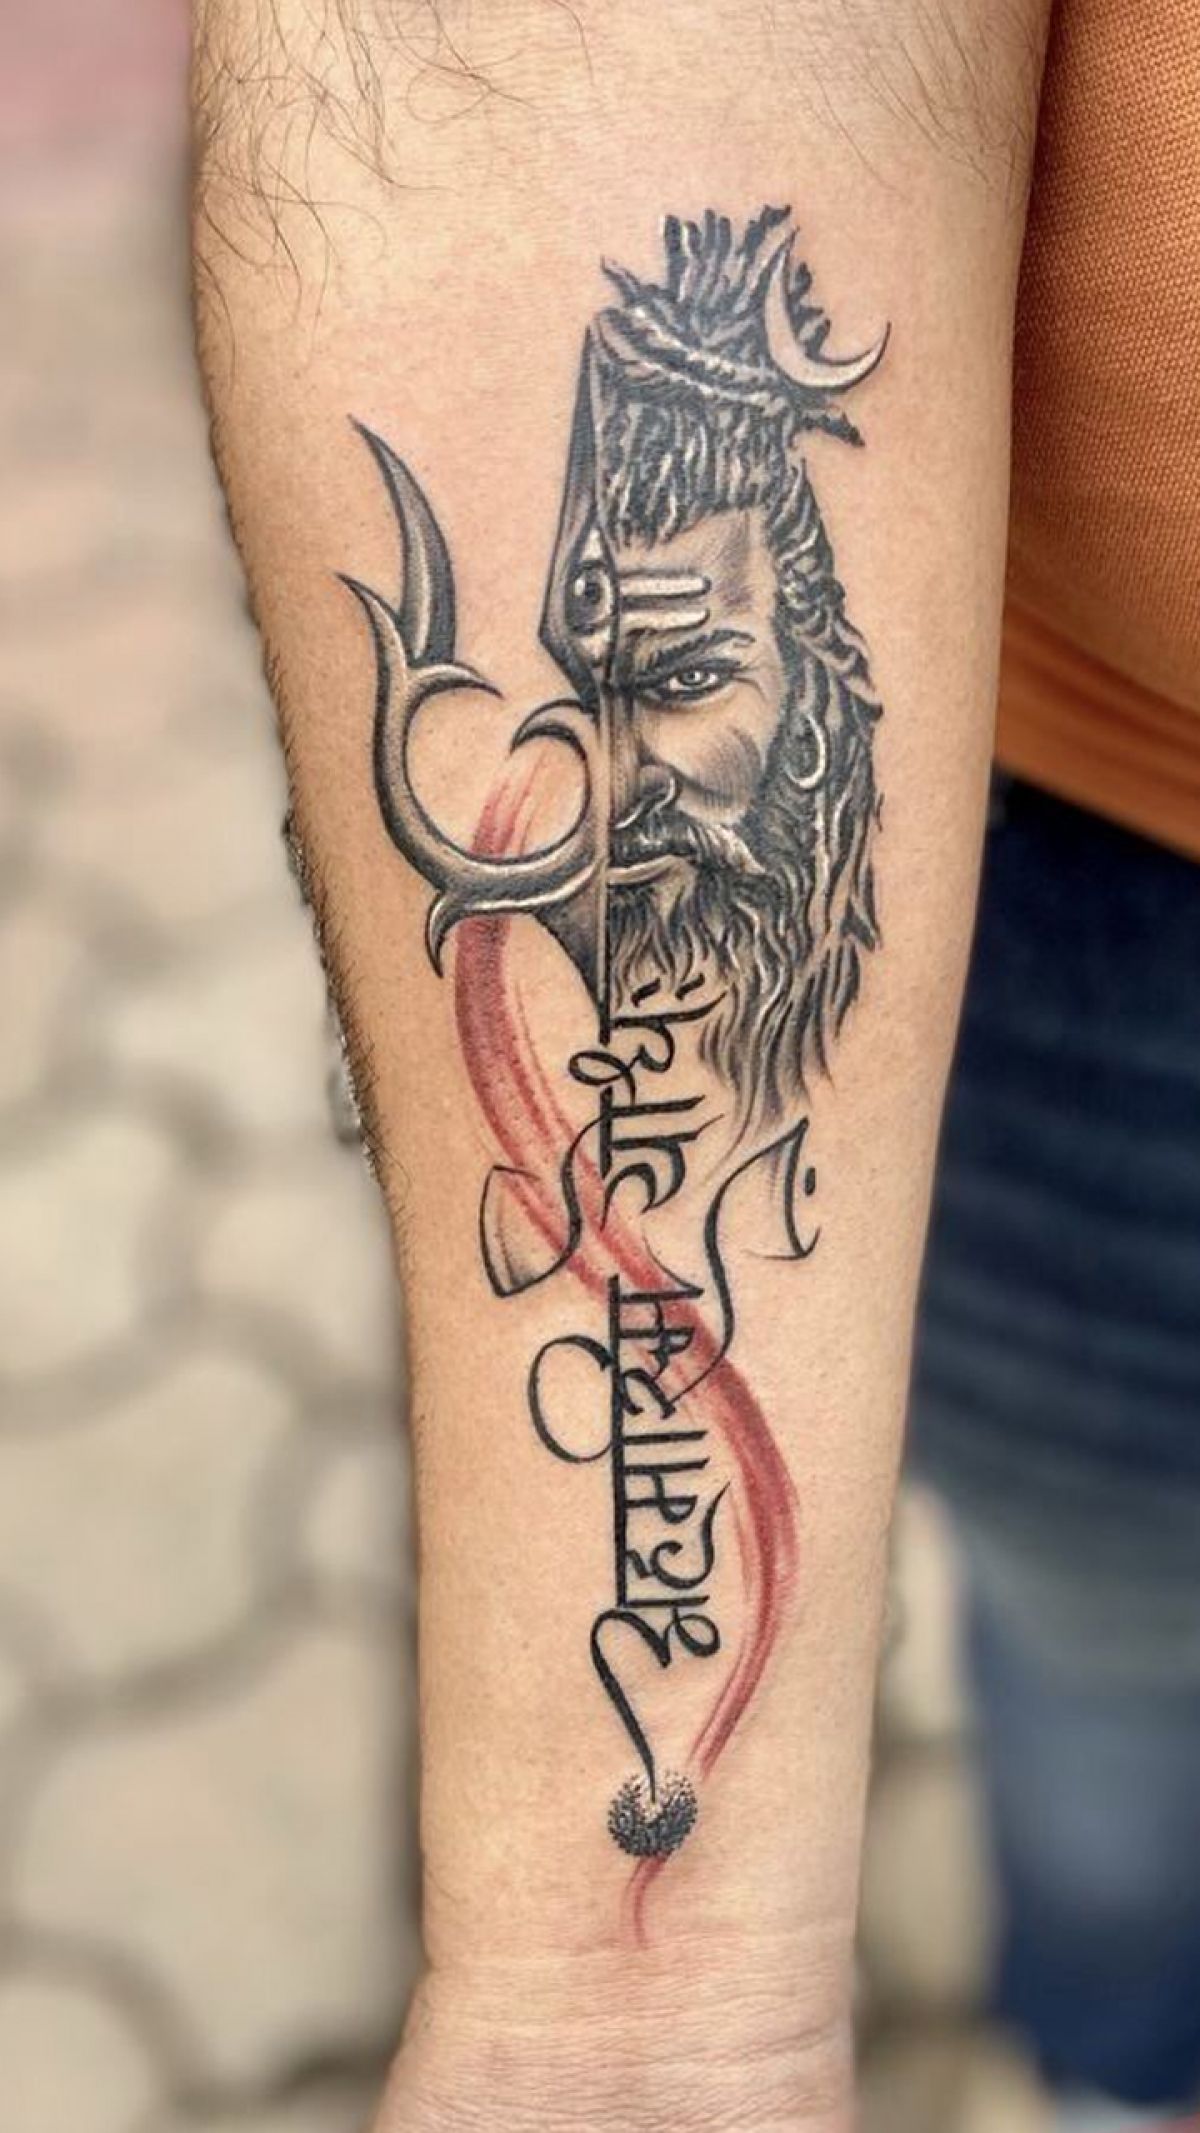 tattooinkmaster on Twitter Devoting the Lord shiva and his supreme power  of death personified A powerful tattoo that will bring you internal peace  and harmony Call 919958499420 DevotingtheLordShivaTattoo  lordshivasymboltattoo shivatattoo 